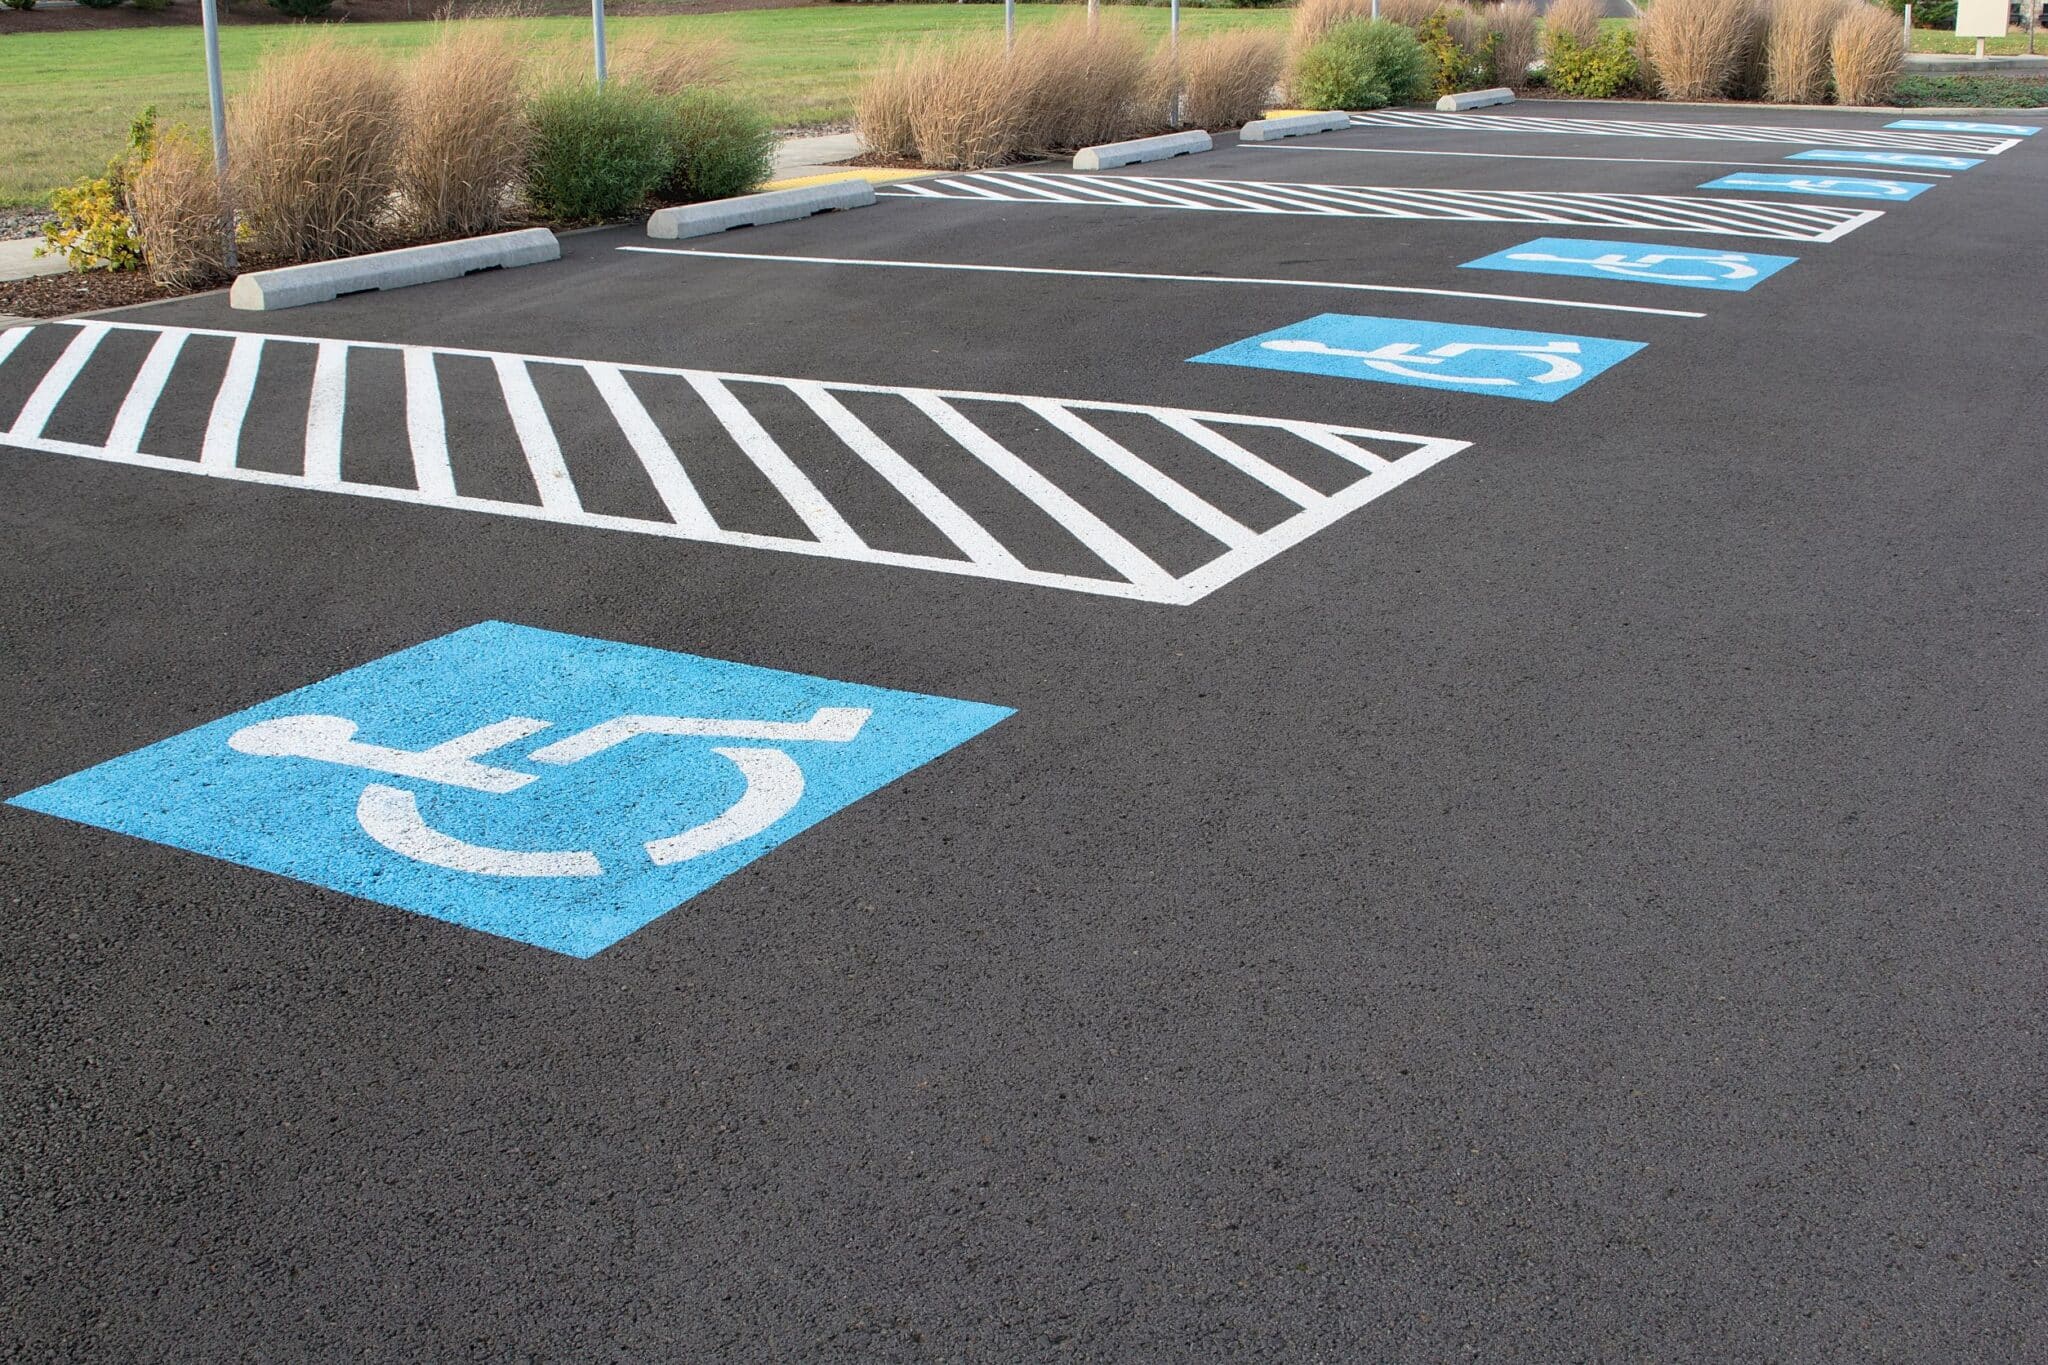 ADA parking spaces in a parking lot